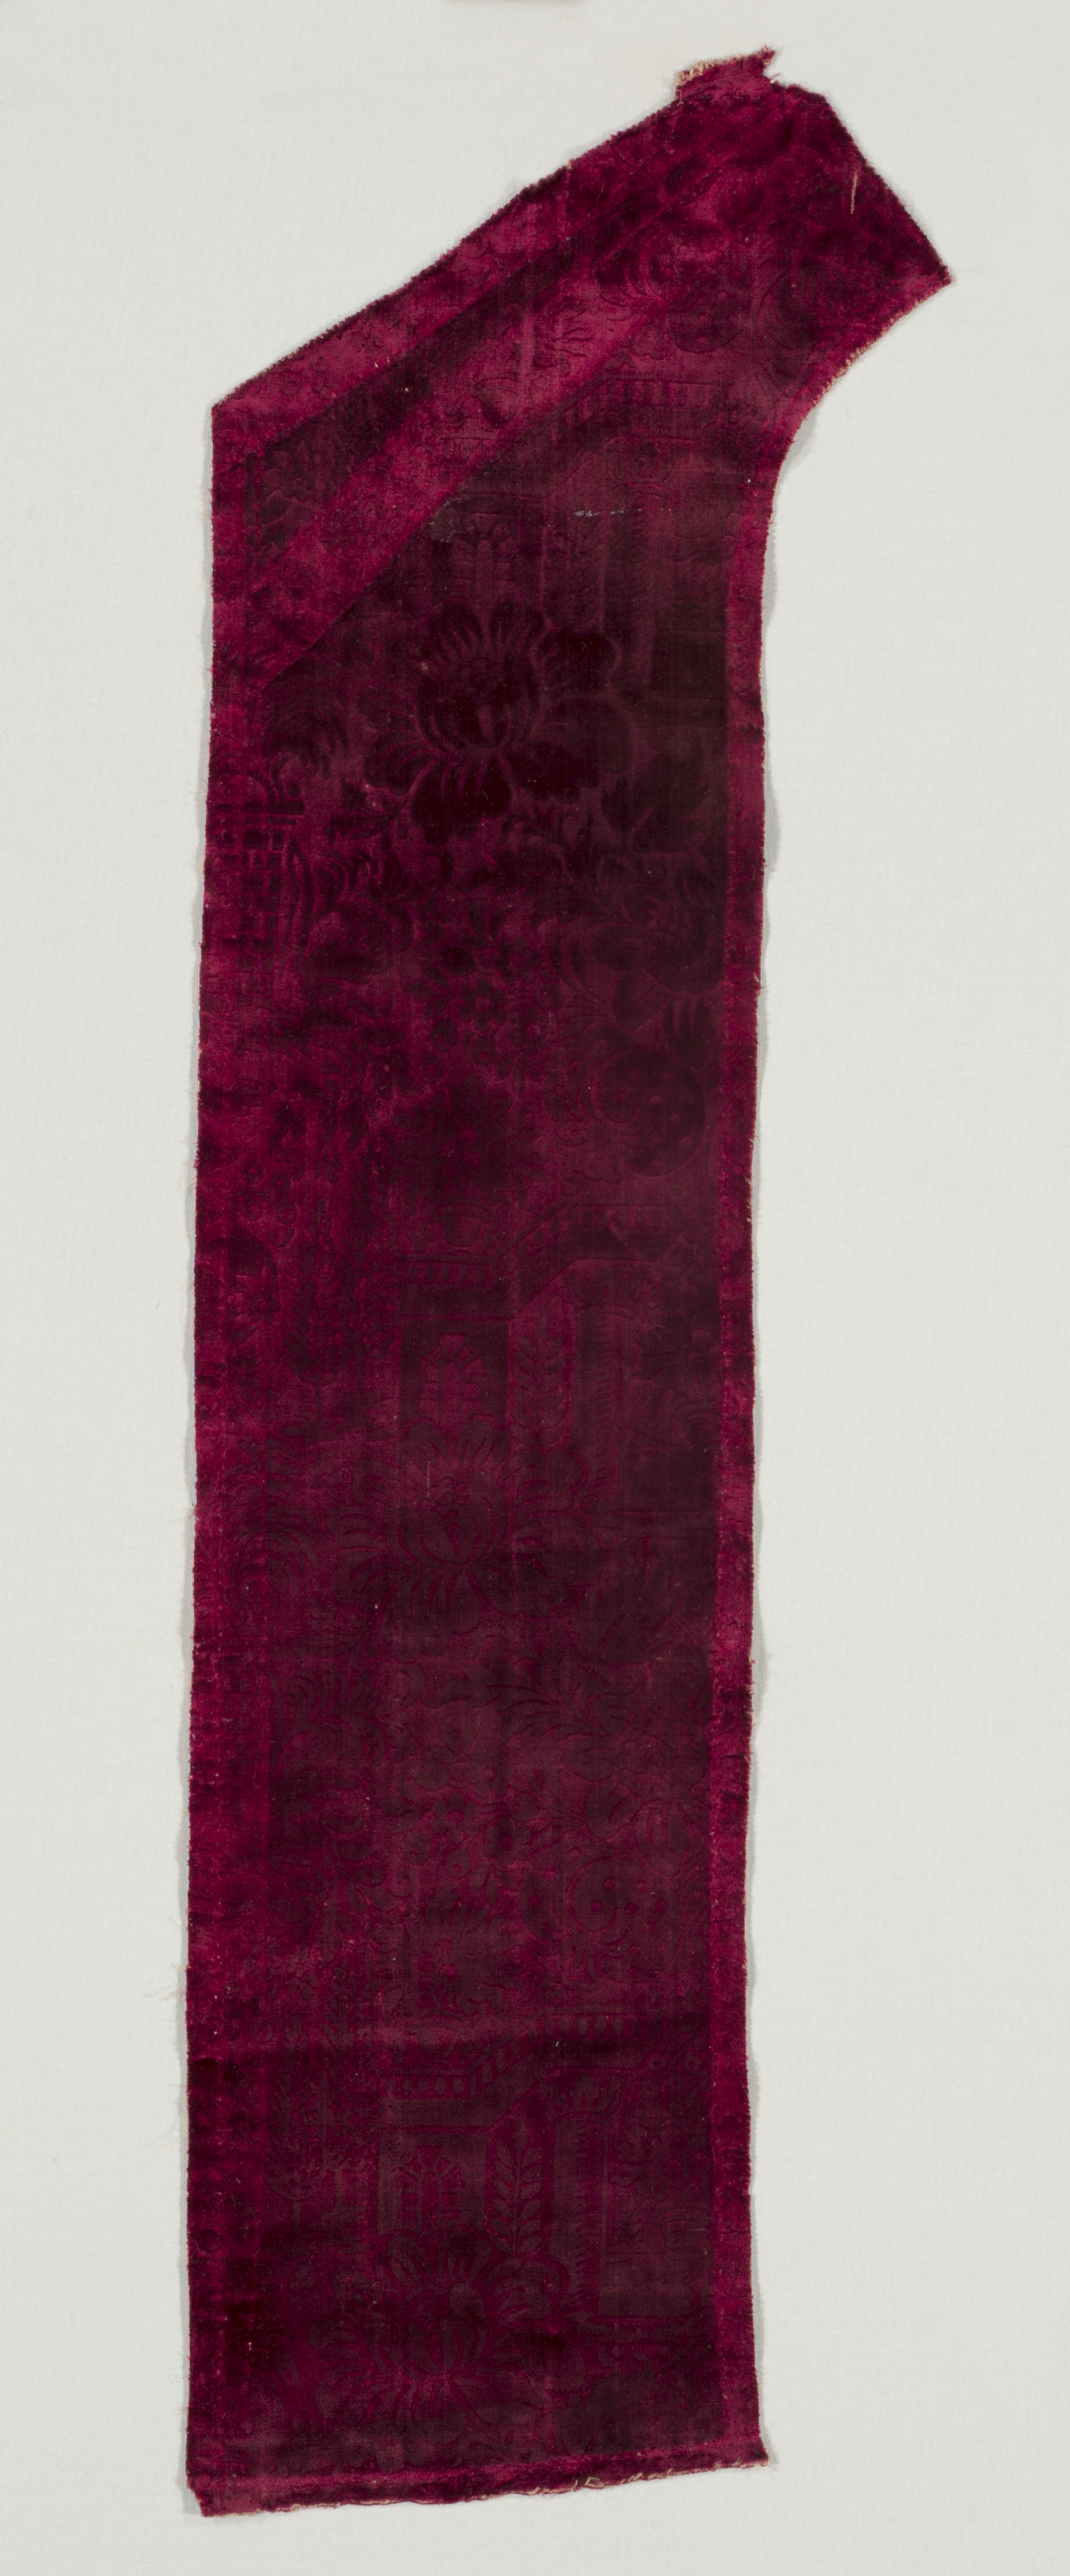 Fragments of a Chasuble